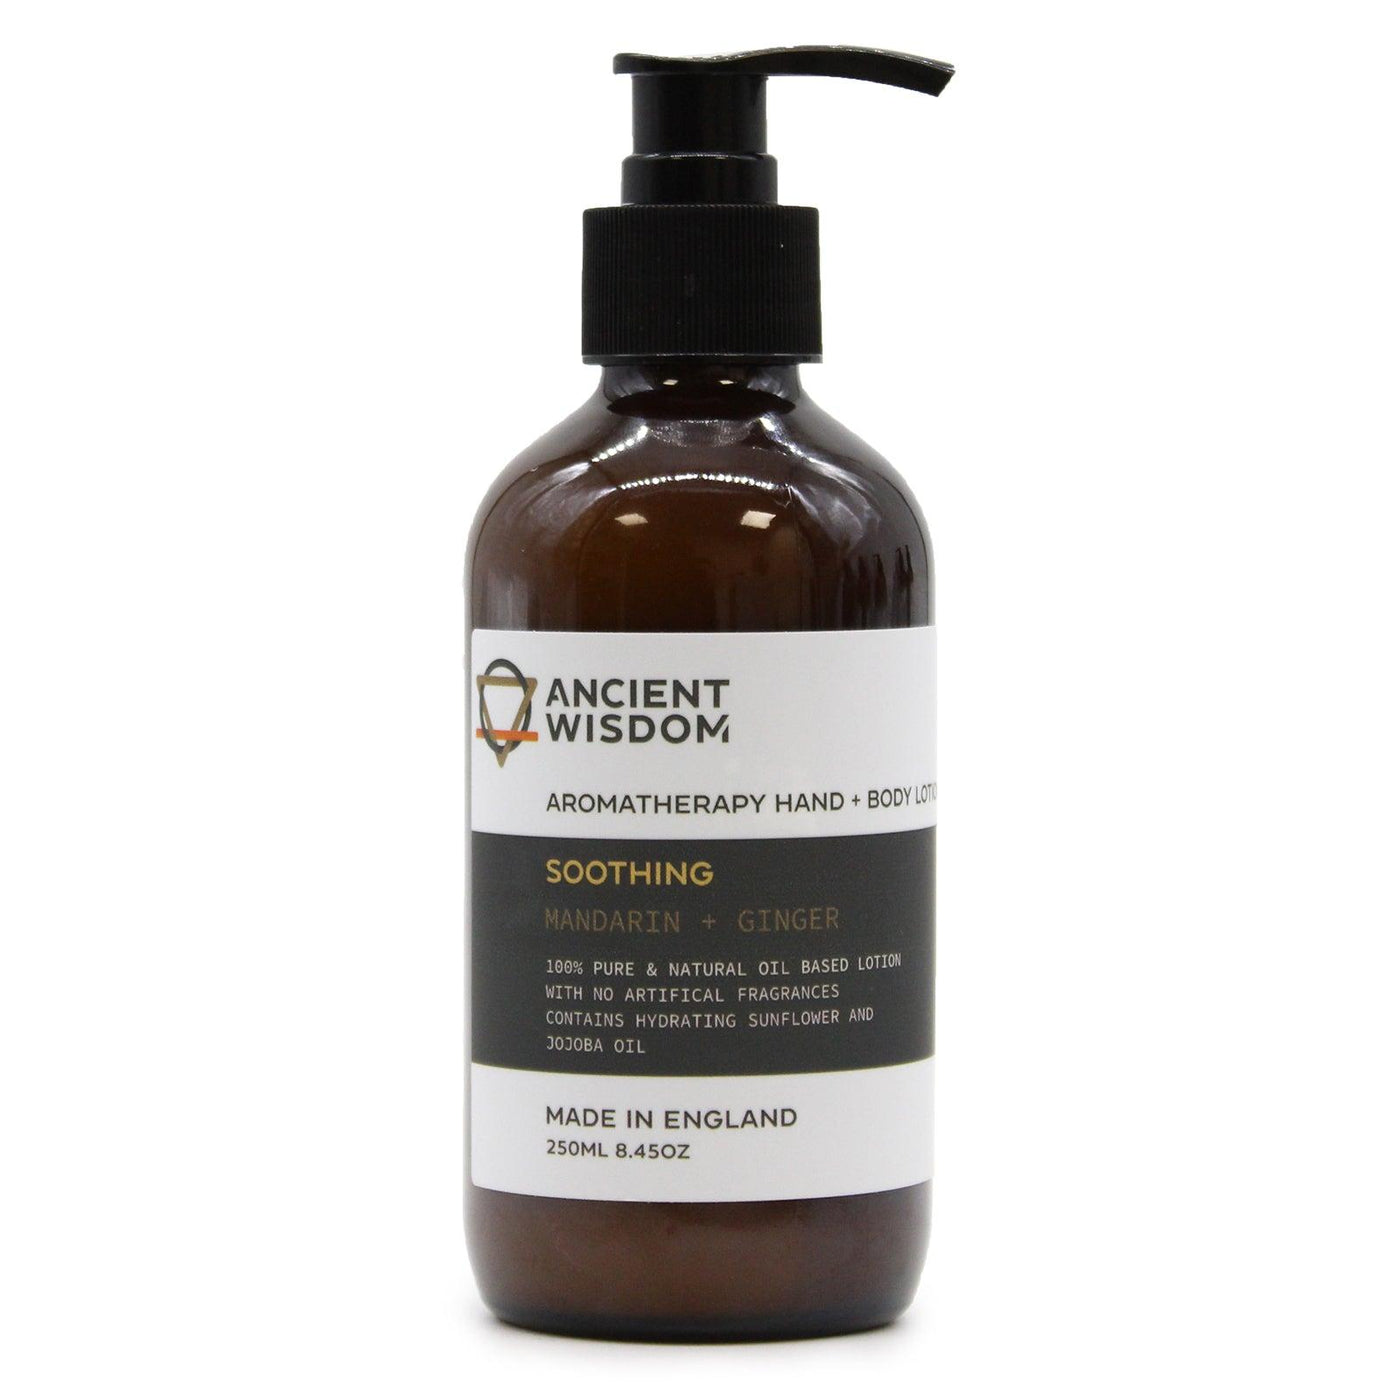 Aromatherapy Natural Essential Oil Hand & Body Lotion - Mandarin & Ginger.